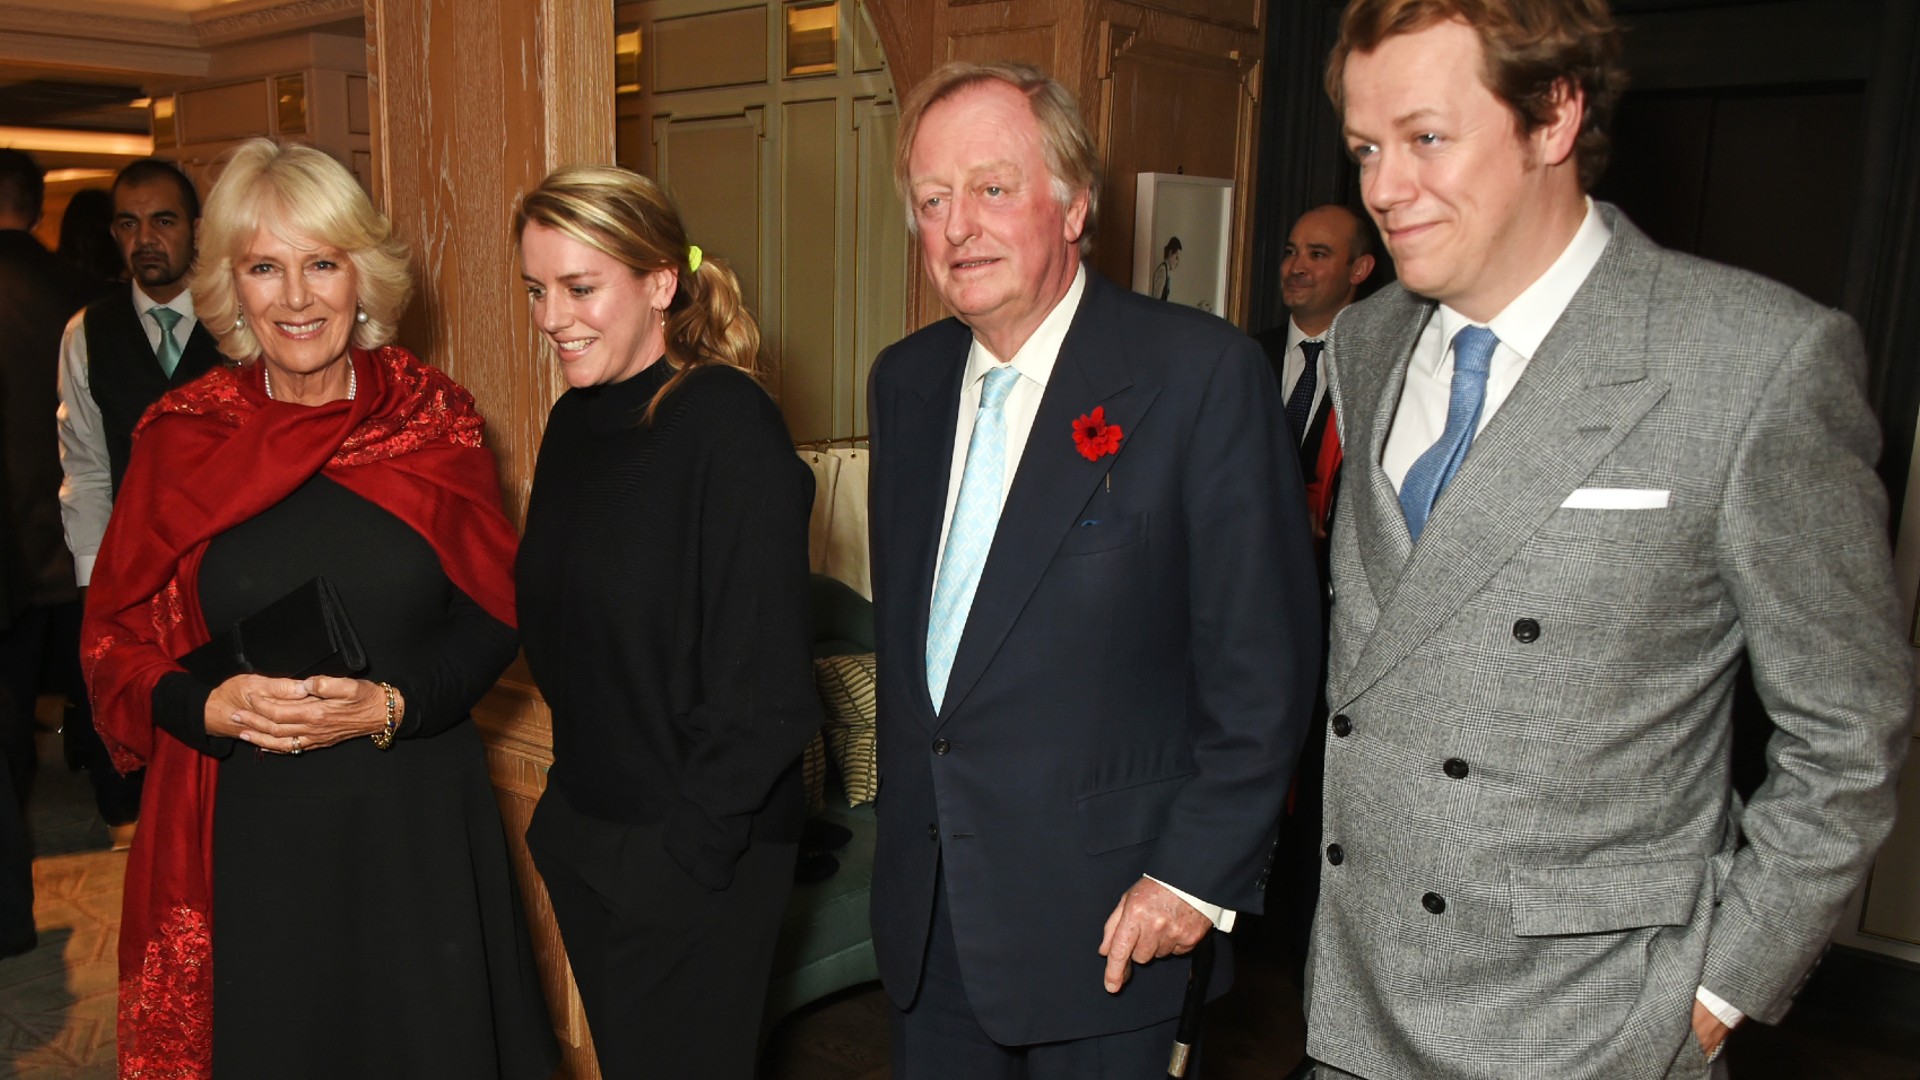 Queen Camilla’s former husband Andrew Parker Bowles new role | Woman & Home